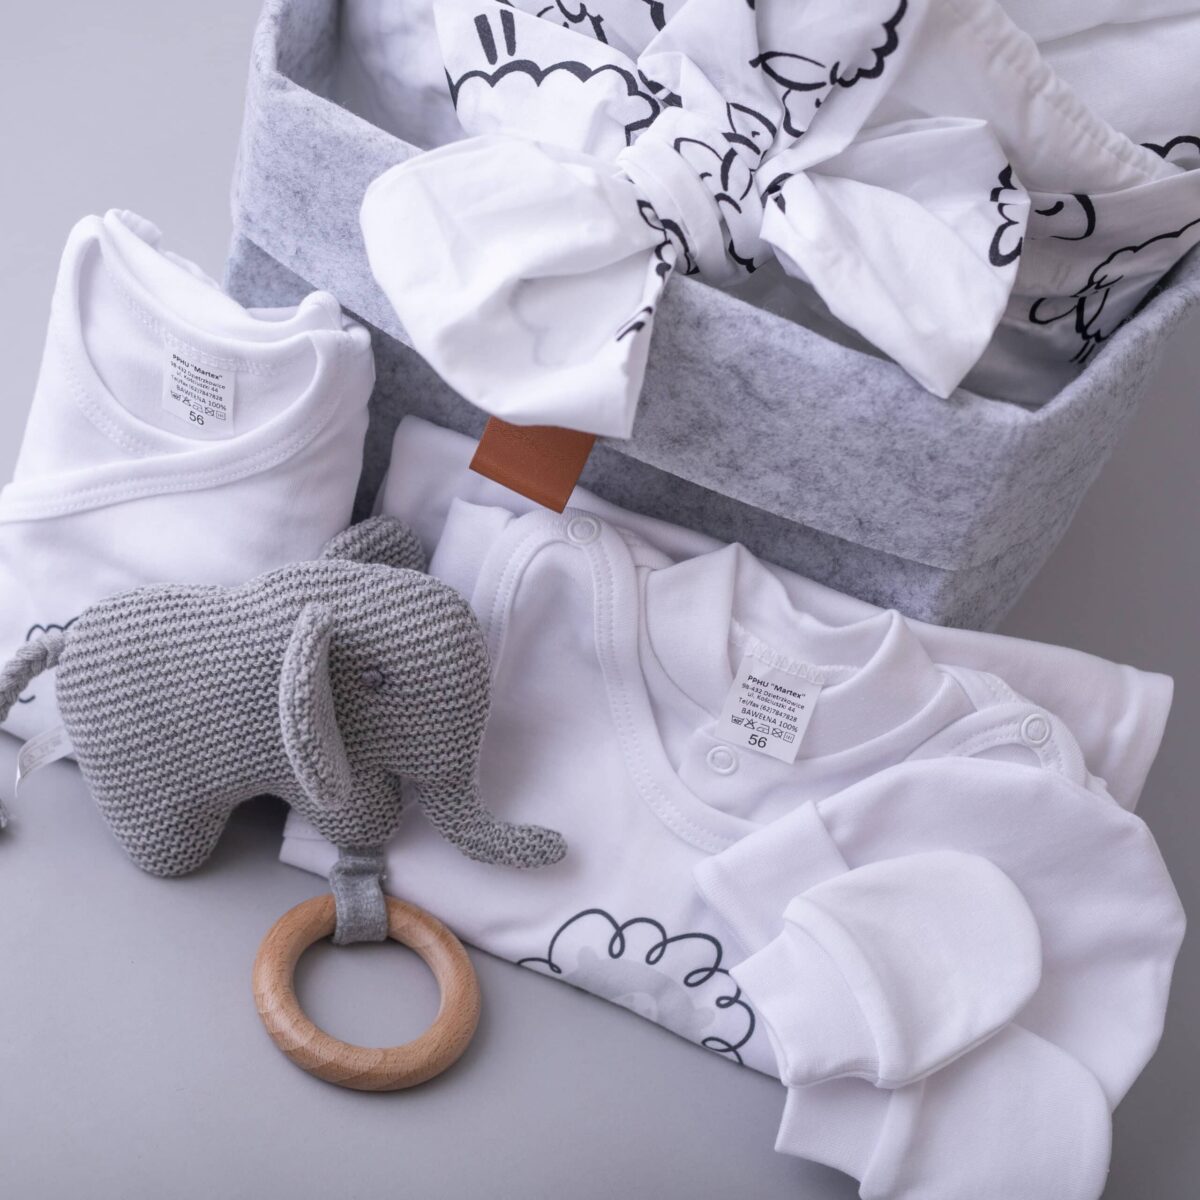 baby gift set, new baby basket, new baby gifts, baby gifts